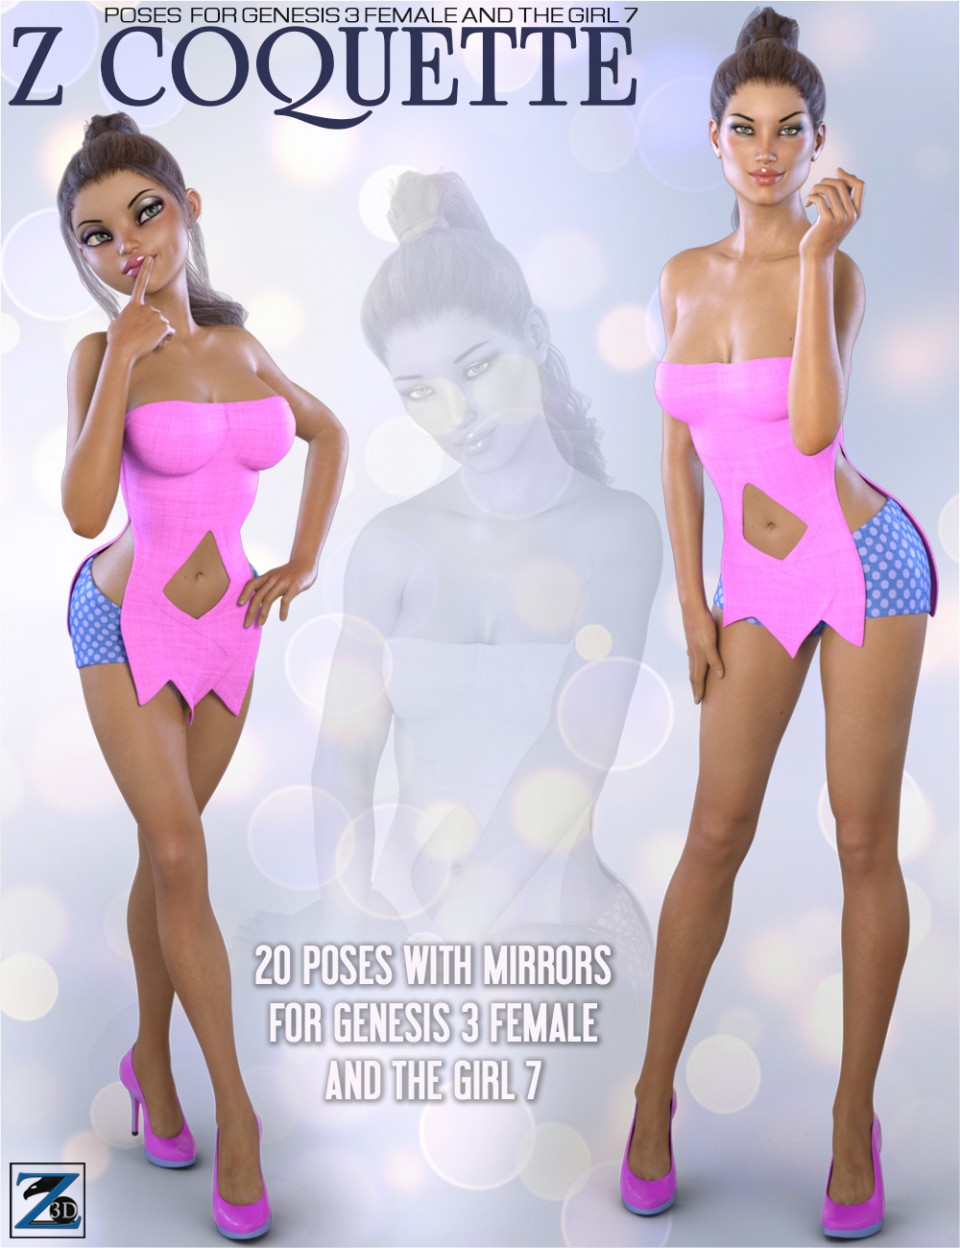 Z Coquette – Poses for Genesis 3 Female and The Girl 7_DAZ3DDL